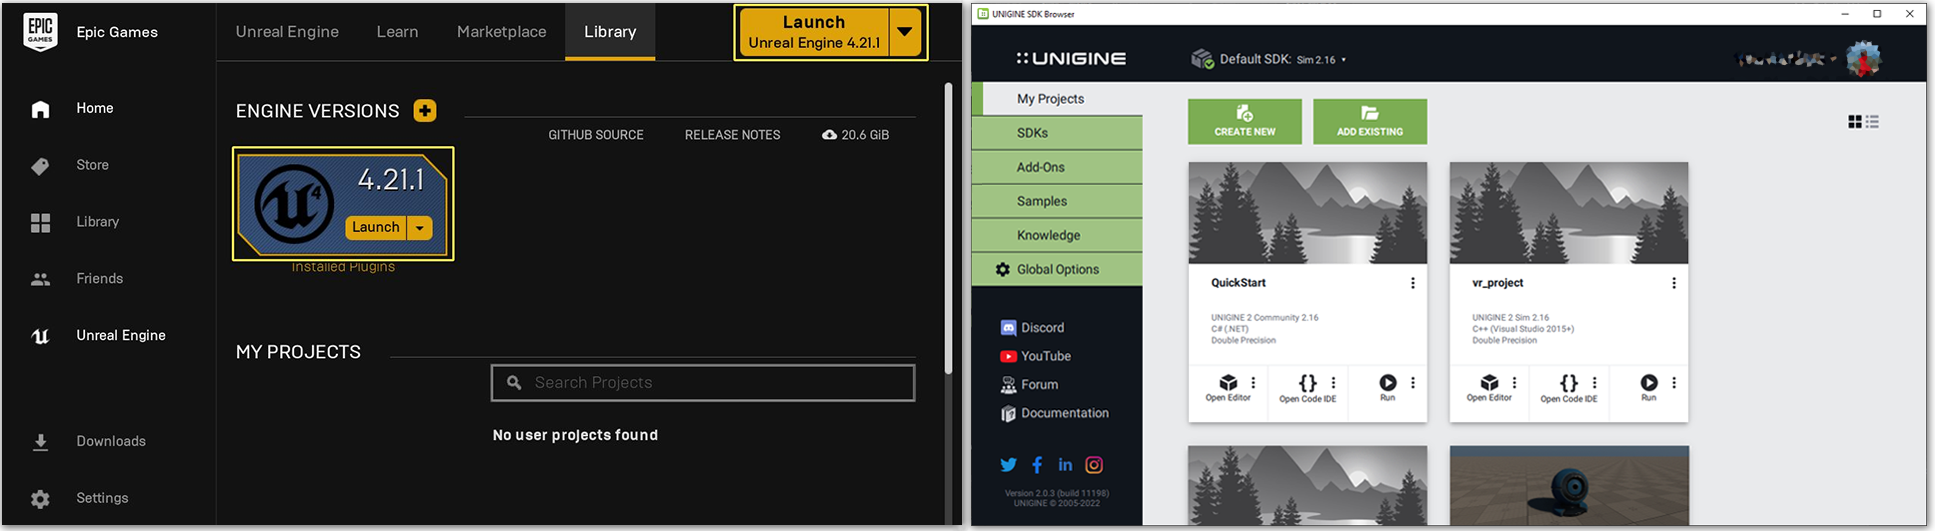 Epic Games Launcher and UNIGINE SDK Browser Comparison (click to enlarge)